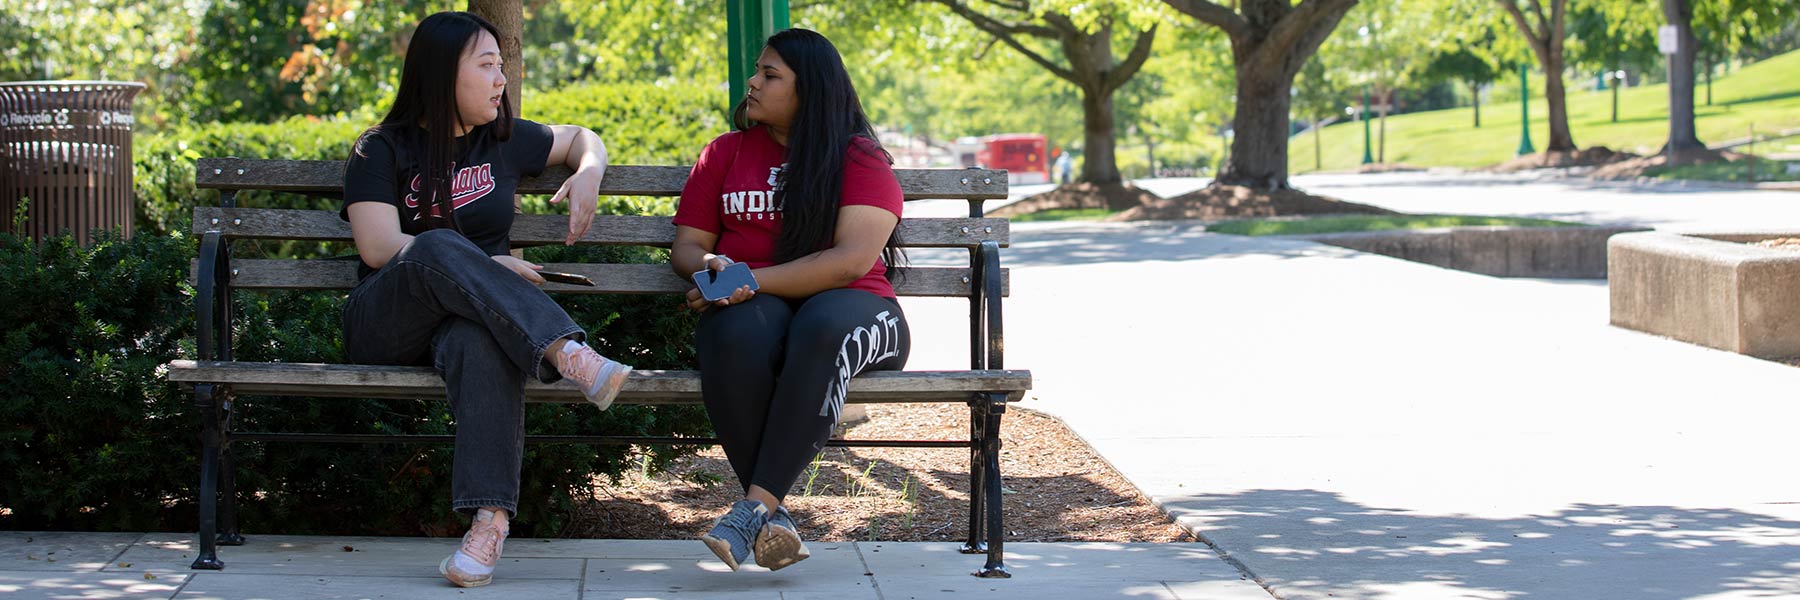 Two female students sit on outdoor benches on a sunny day talking.